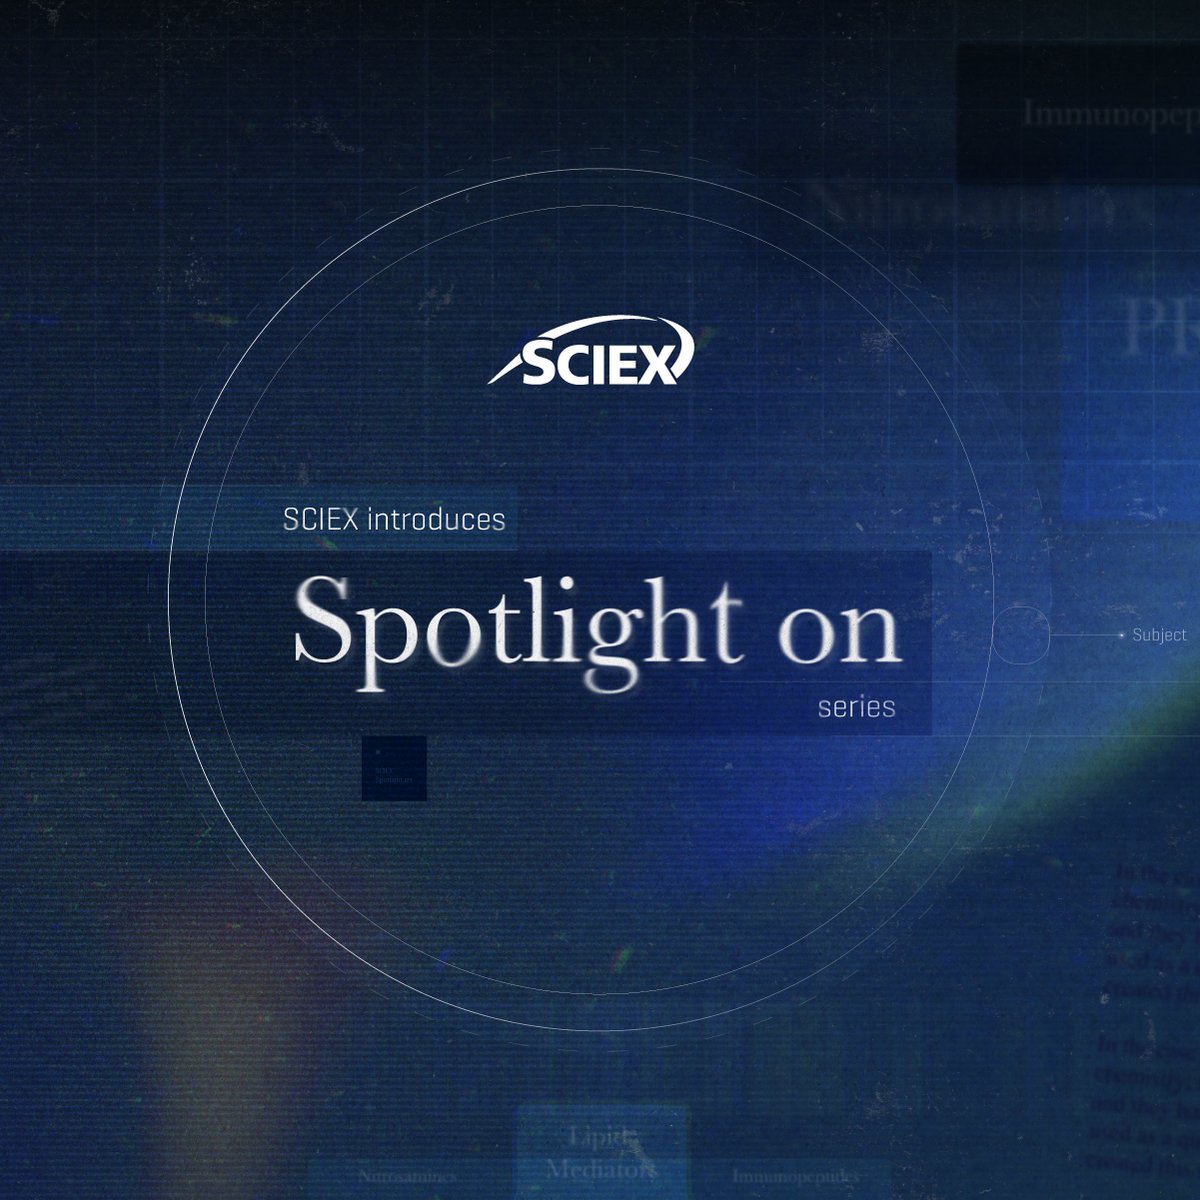 💡Spotlight on series 💡 Featuring molecules and #LCMSTechnology that can aid in overcoming quantitation obstacles. Stay tuned, coming soon! #SpotlightOnSeries #Quantitation #LCMSanalysis #SCIEX